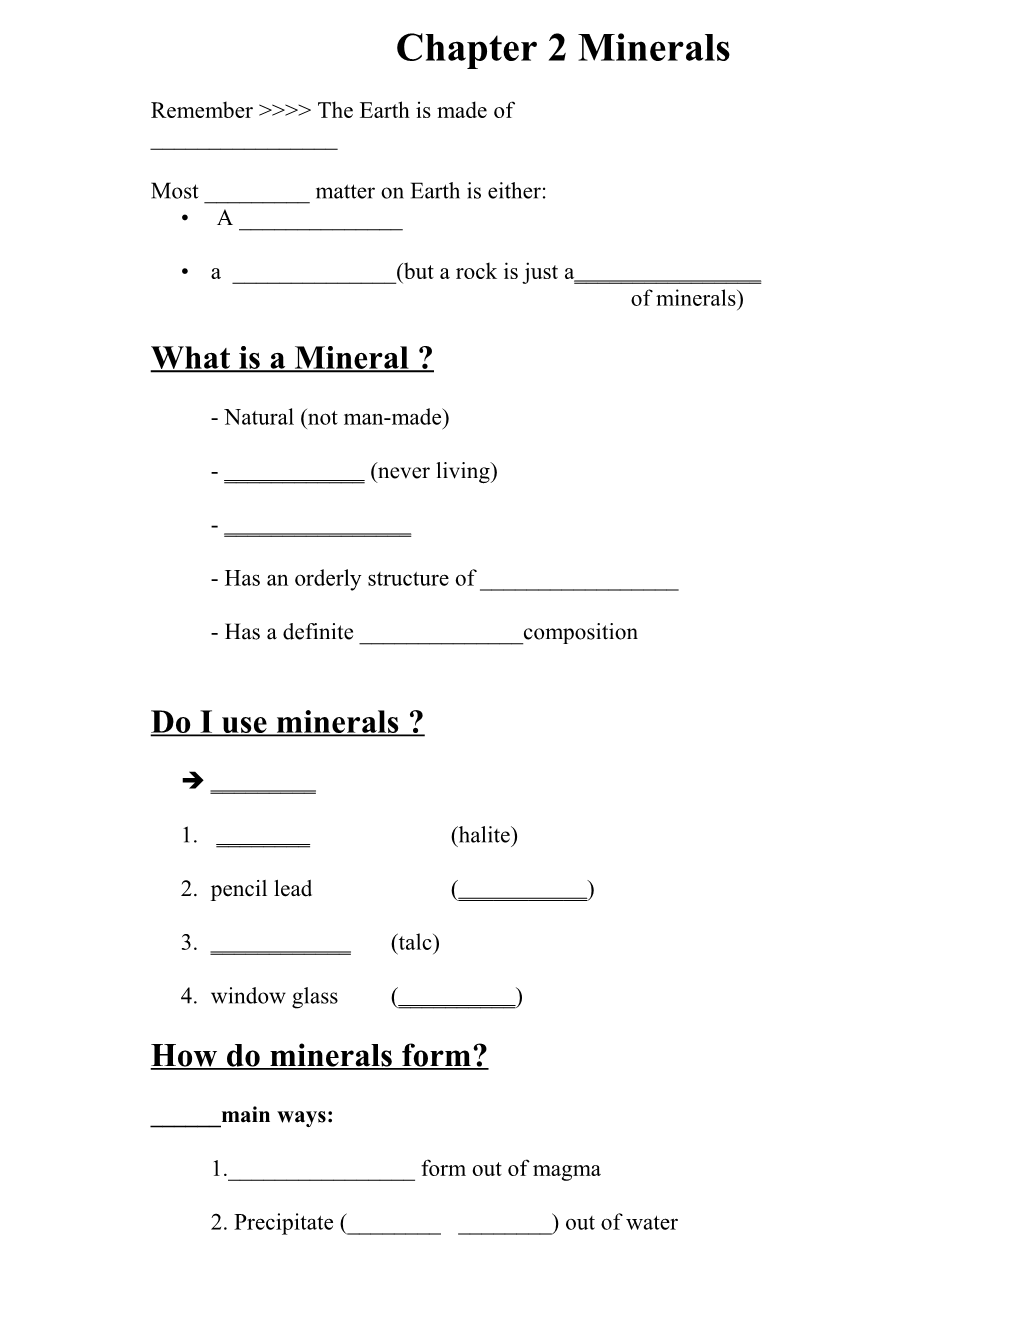 Chapter 2 Minerals